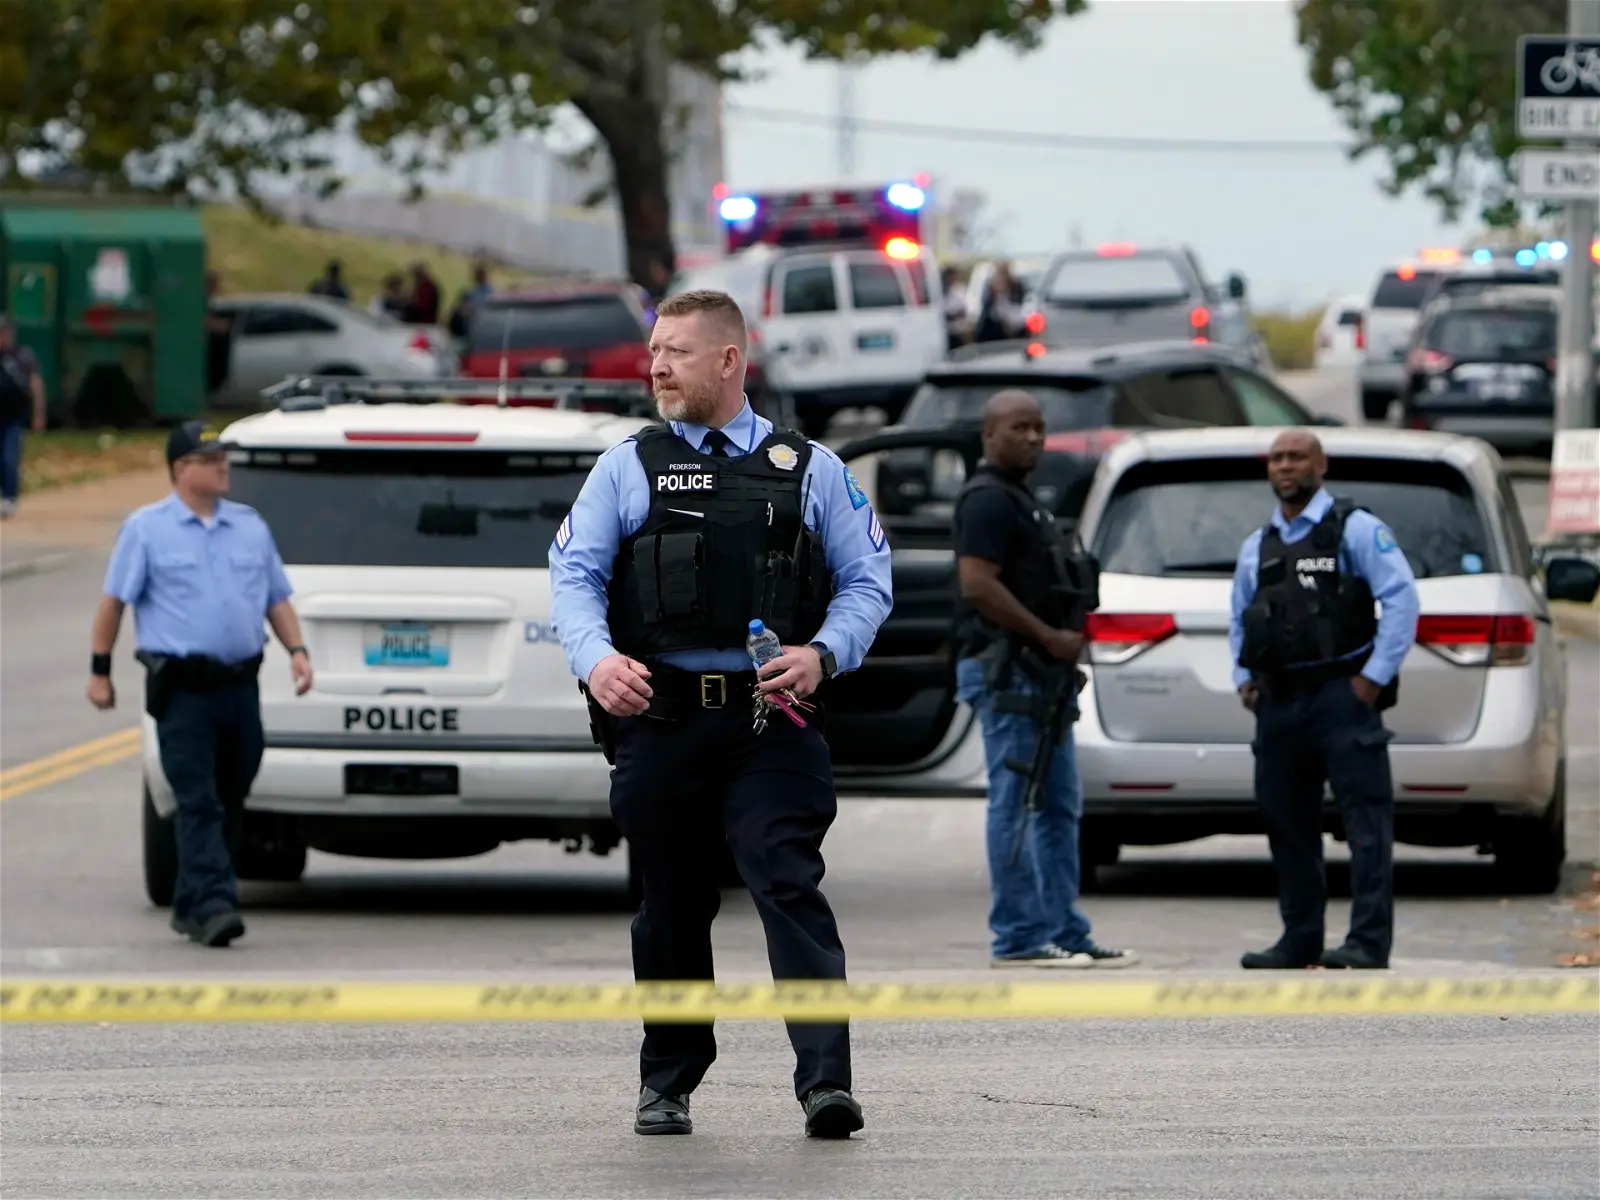 Shooter kills 6 at US school in targeted attack